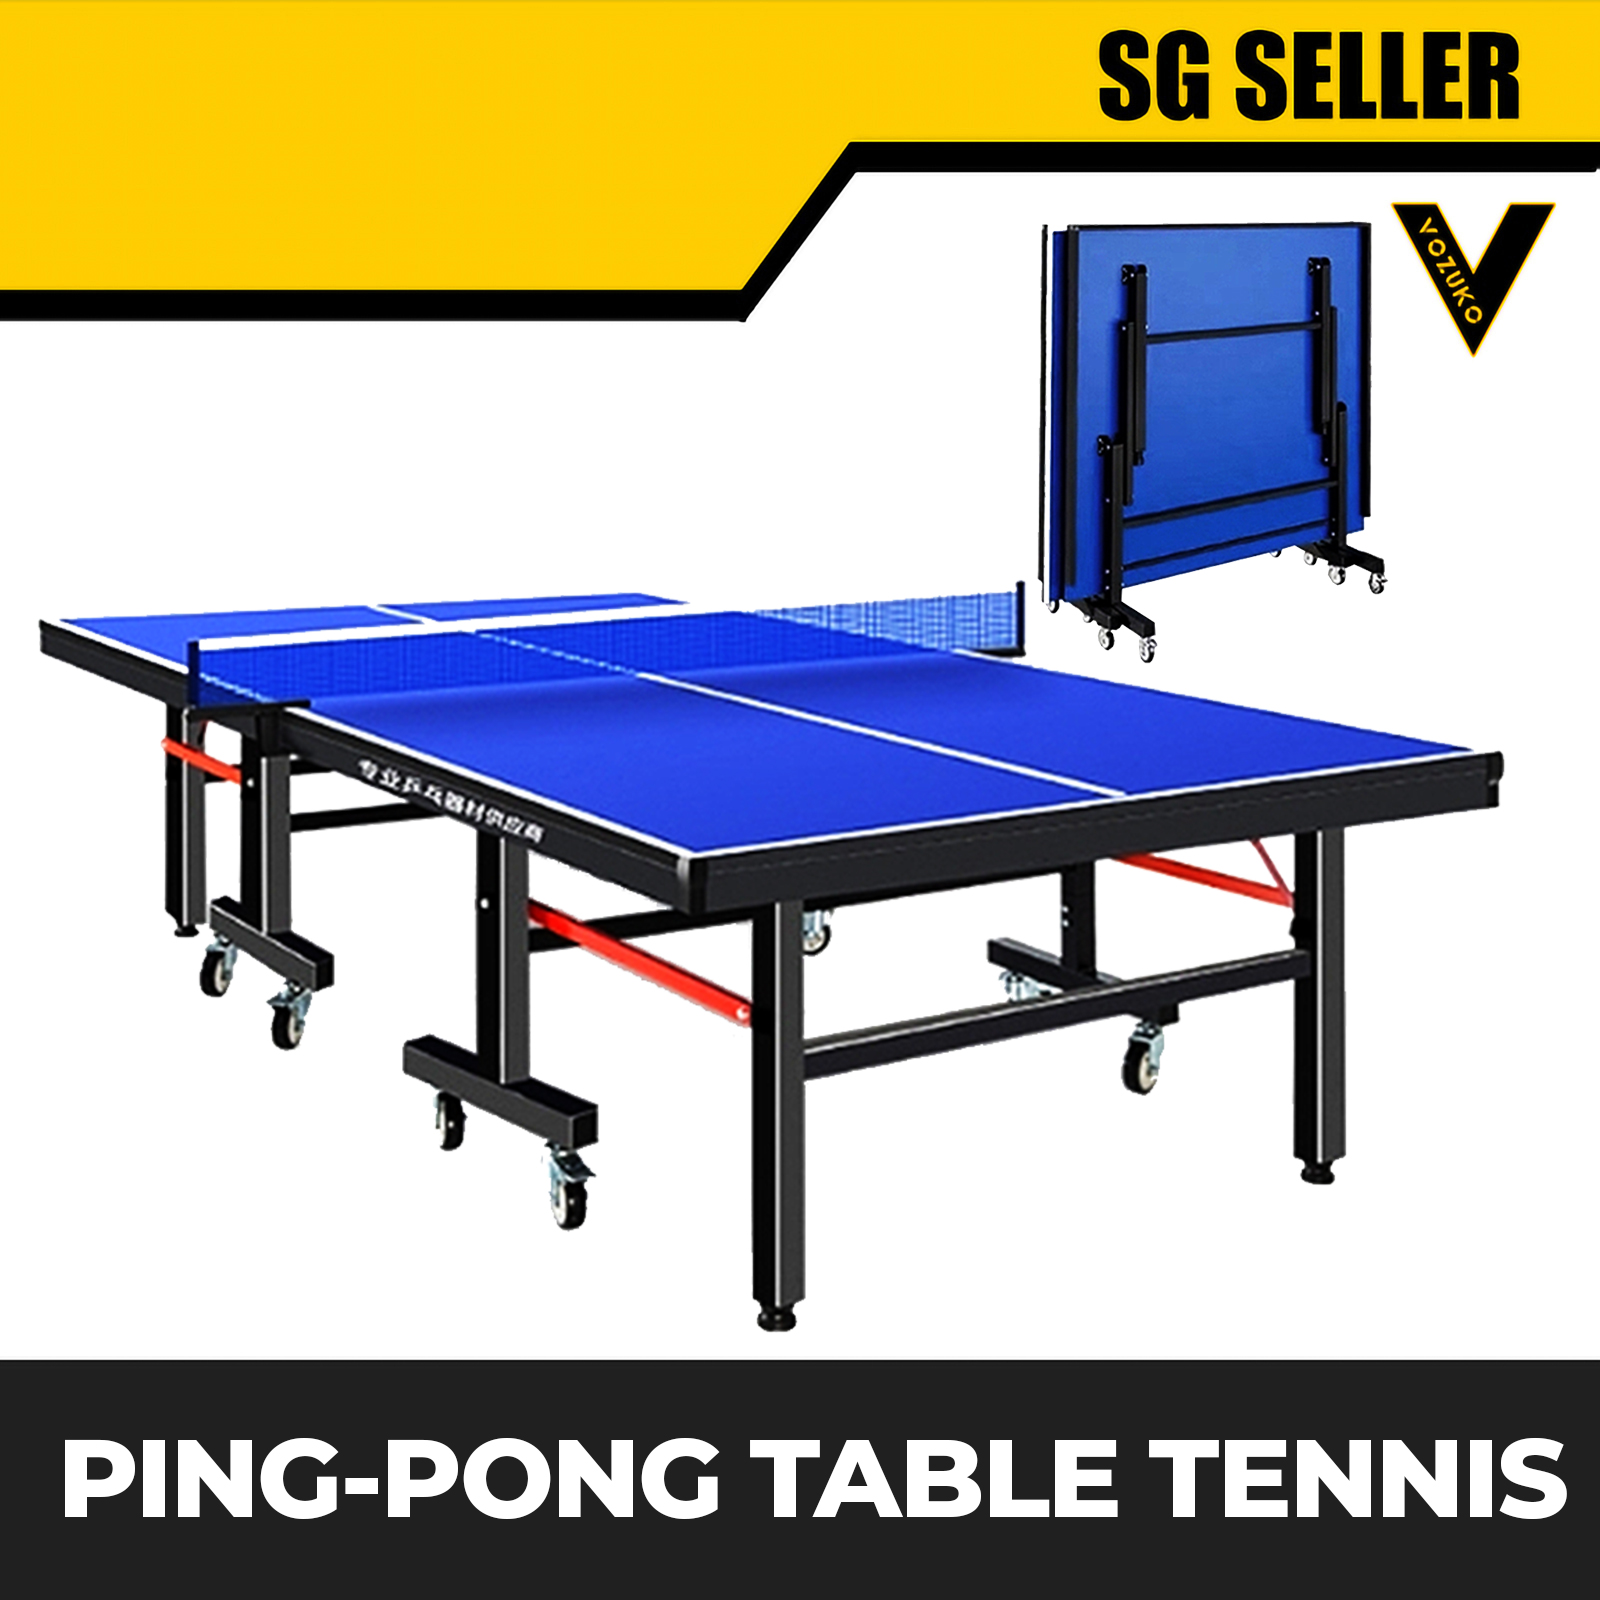 Foldable Ping Pong Table - Best Price in Singapore